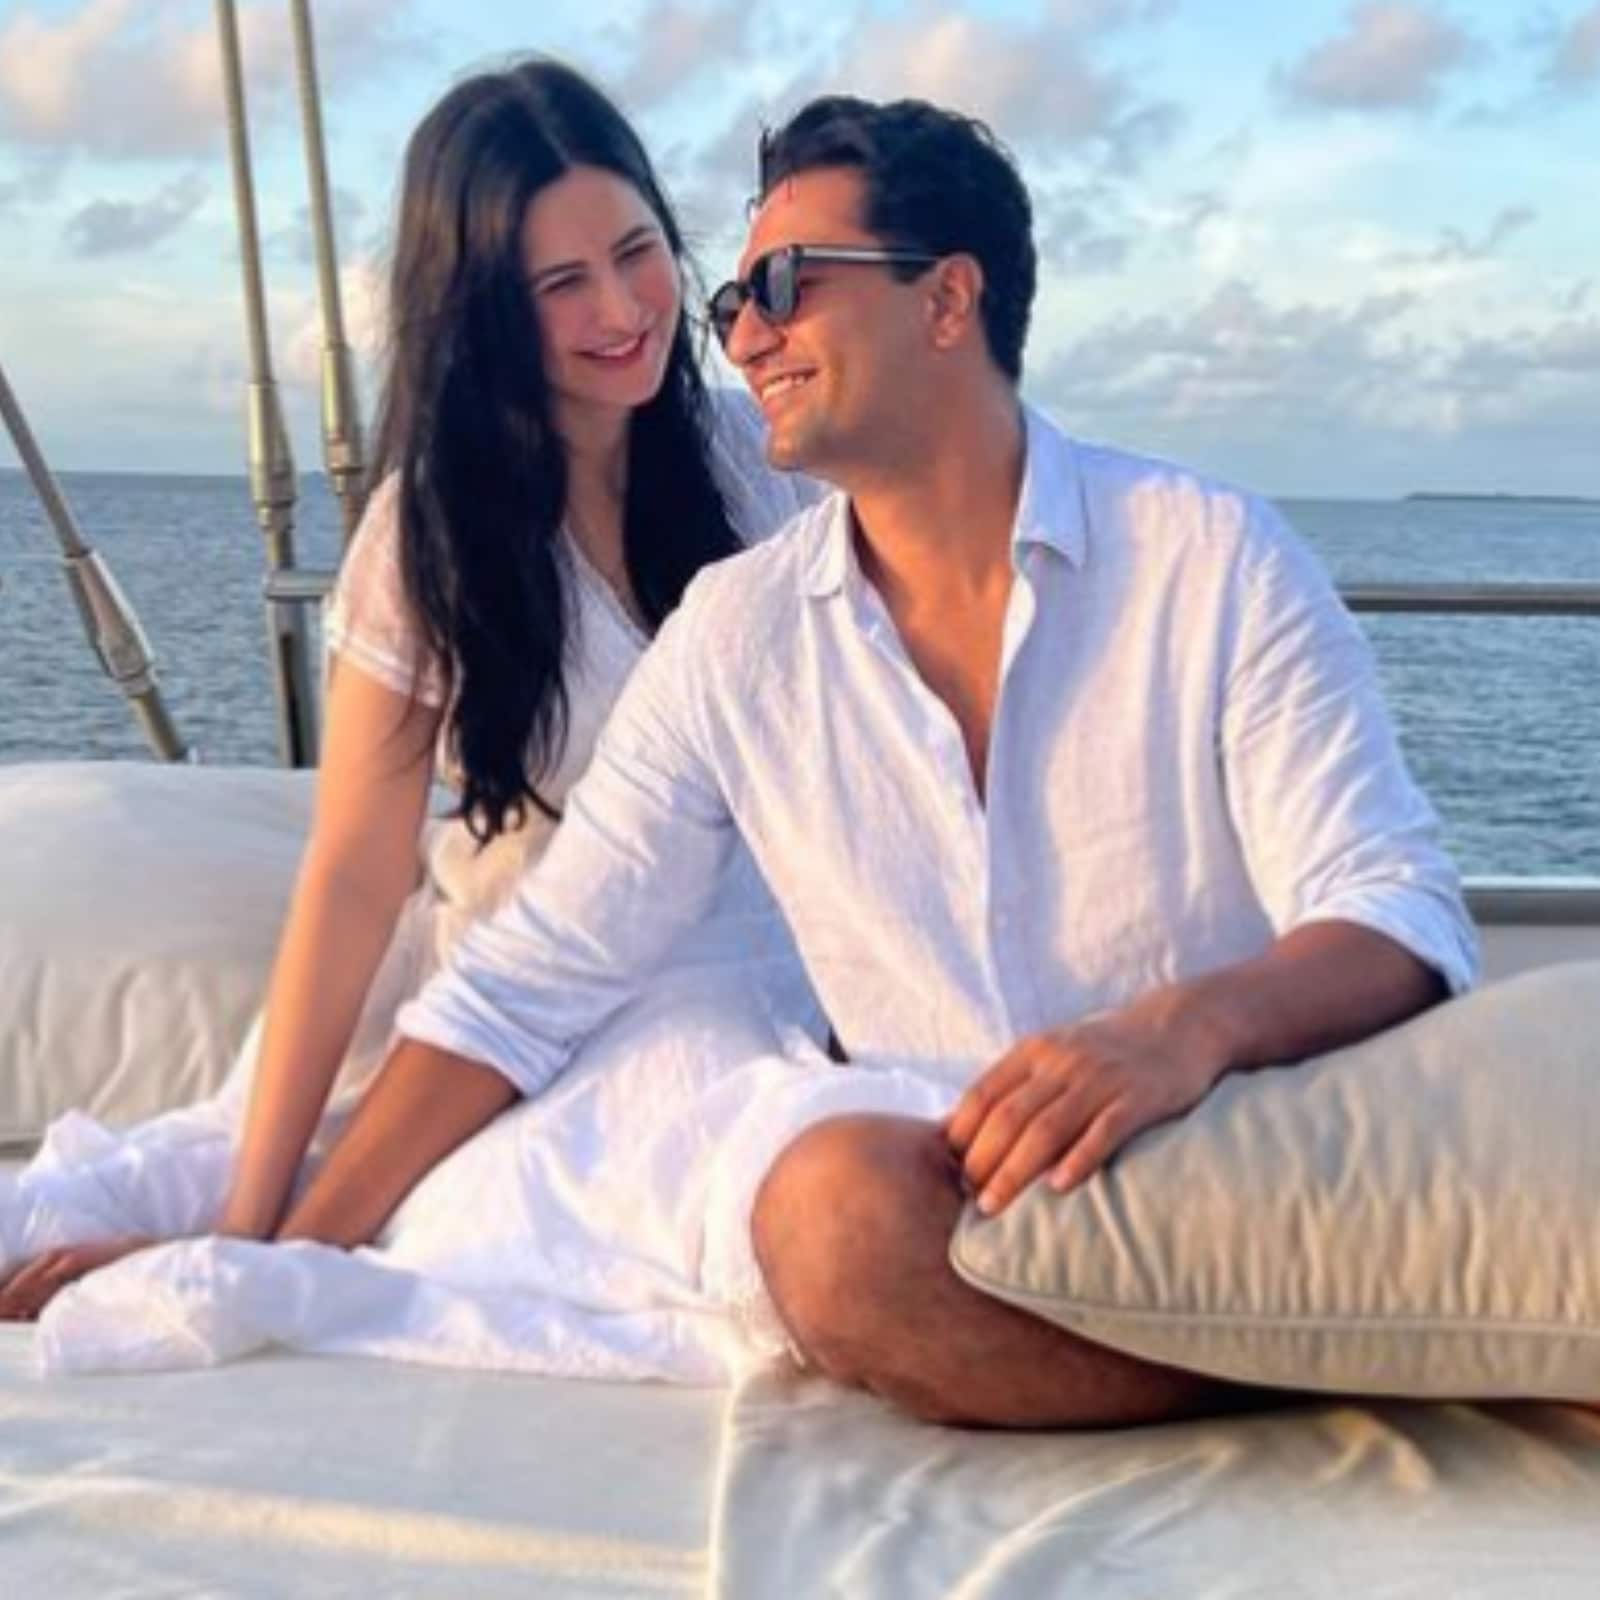 Katrina Ki Chudai Sexy Video Full Hd - Katrina Kaif Confesses She Didn't Know Much About Vicky Kaushal at First:  'When I Met Him, I Was...' - News18